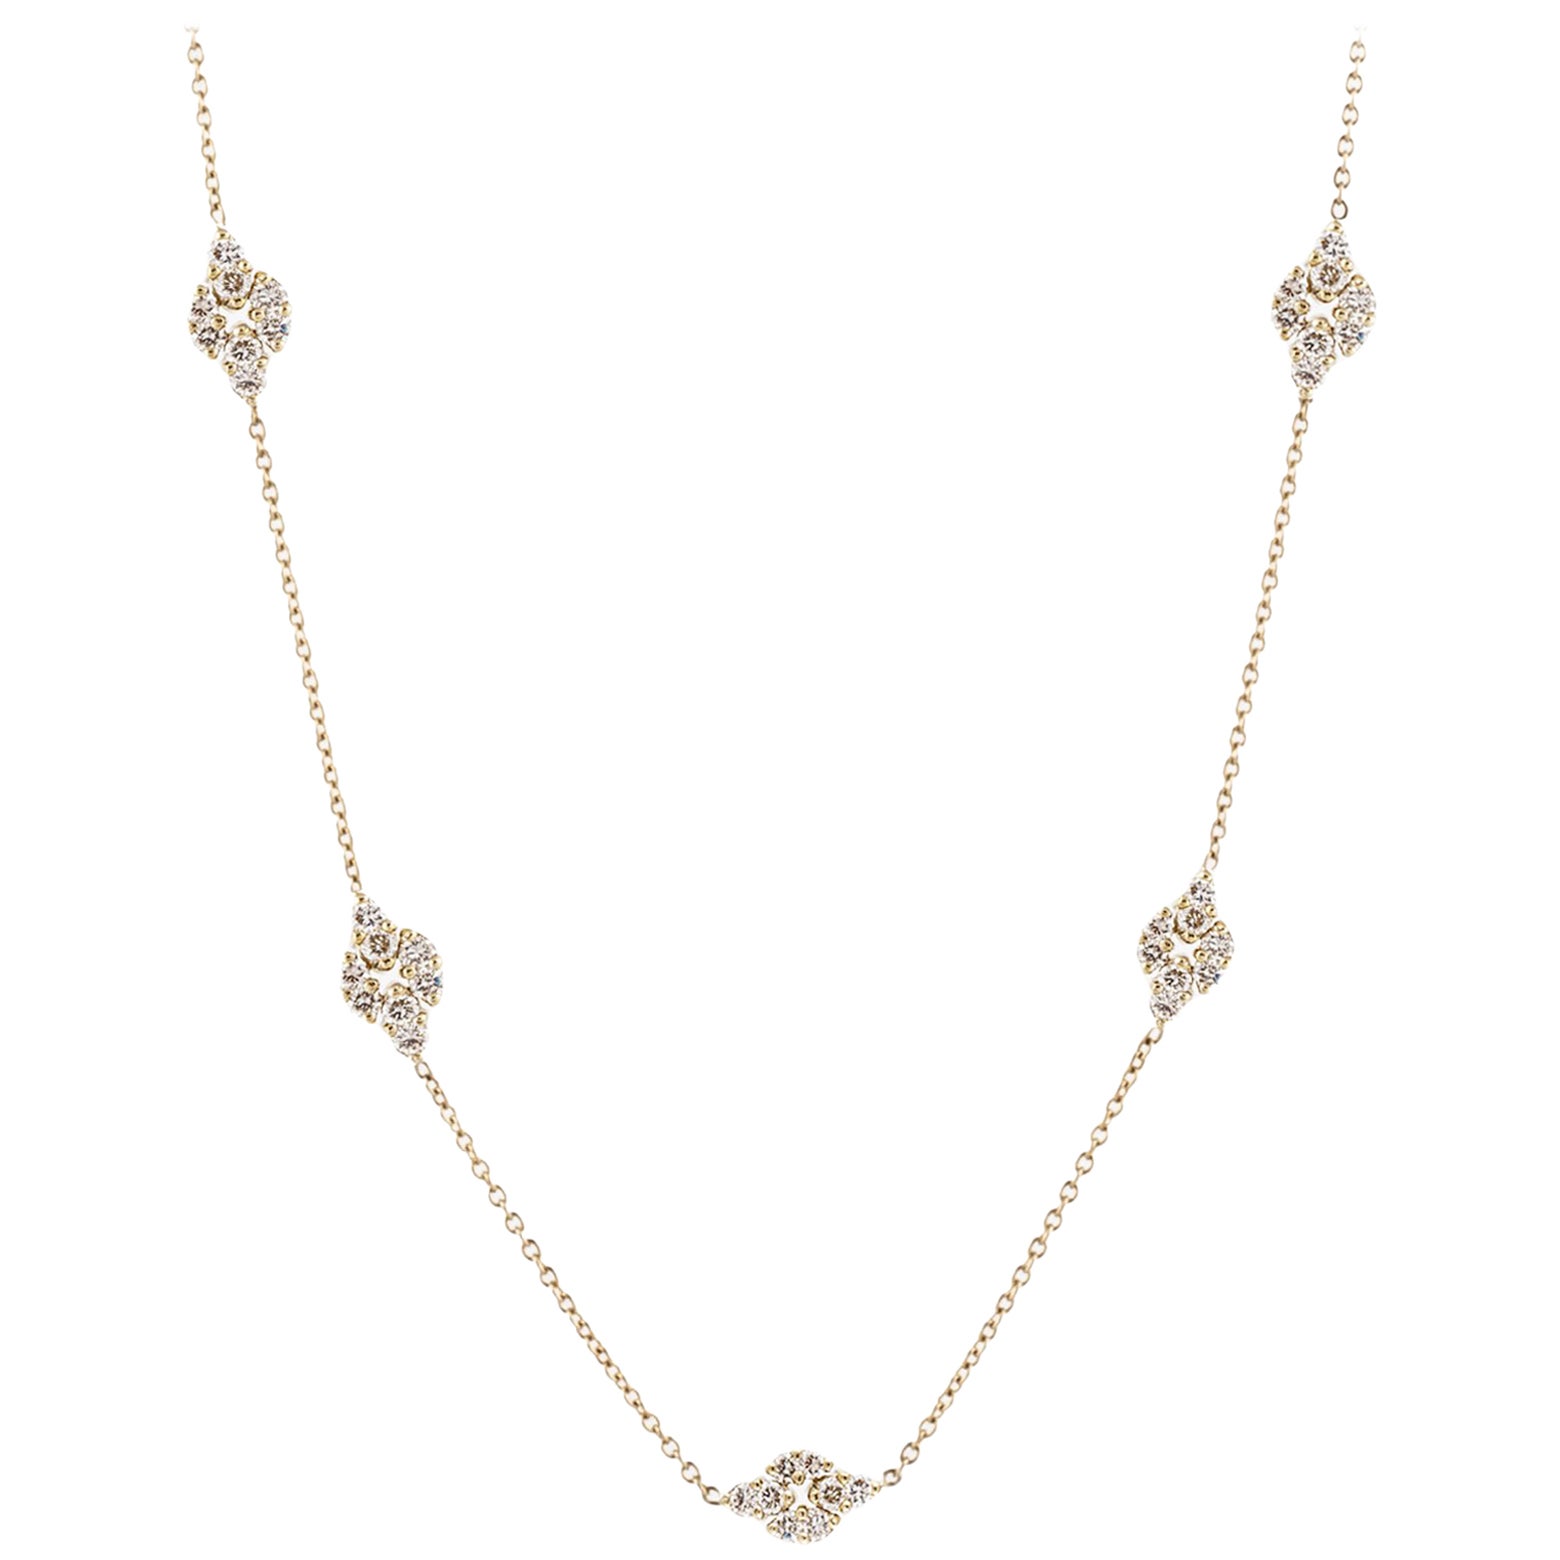 Long 18 Karat Gold Adjustable Mid-Victorian Chain For Sale at 1stDibs